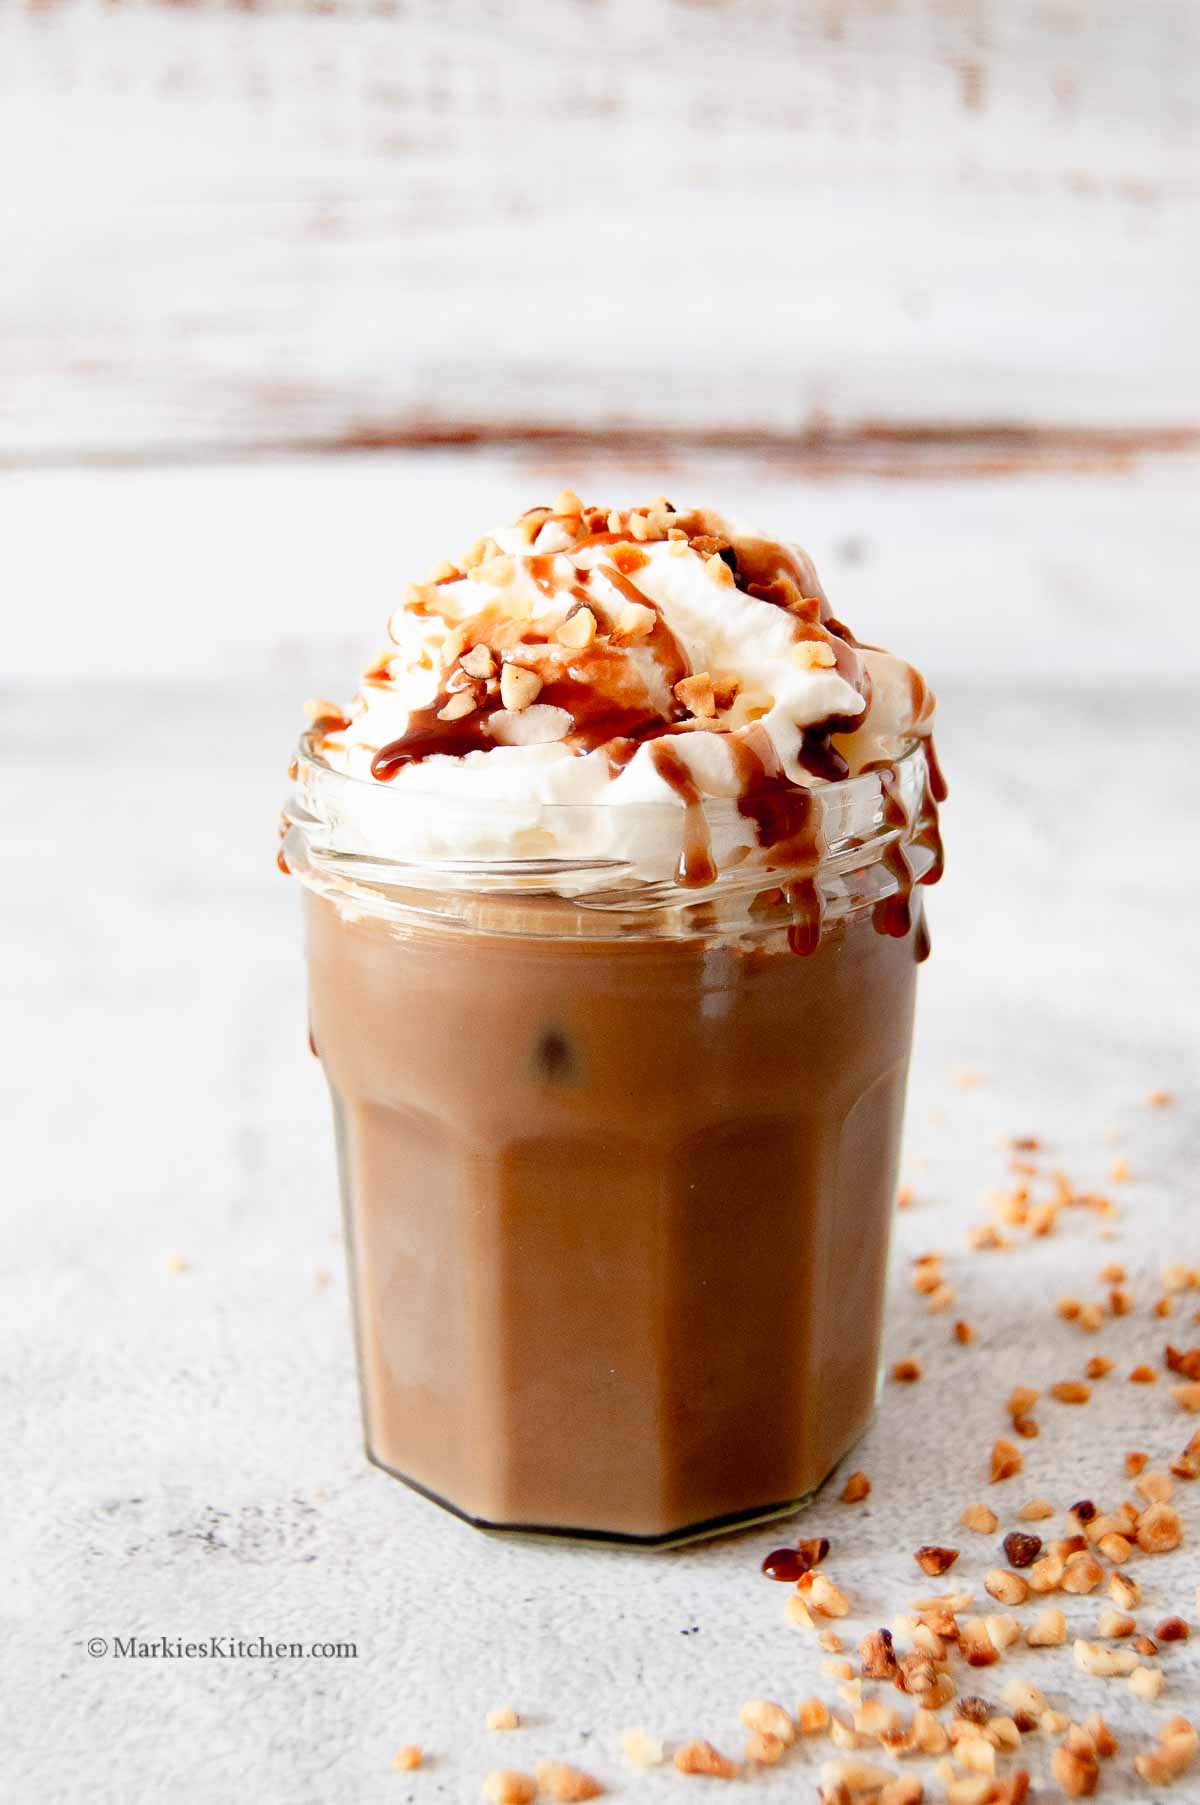 A photo of a jar with iced coffee that is topped with squirty cream, chocolate sauce and chopped hazelnuts. There are some more chopped hazelnuts next to the jar, at the bottom right corner of the photo.